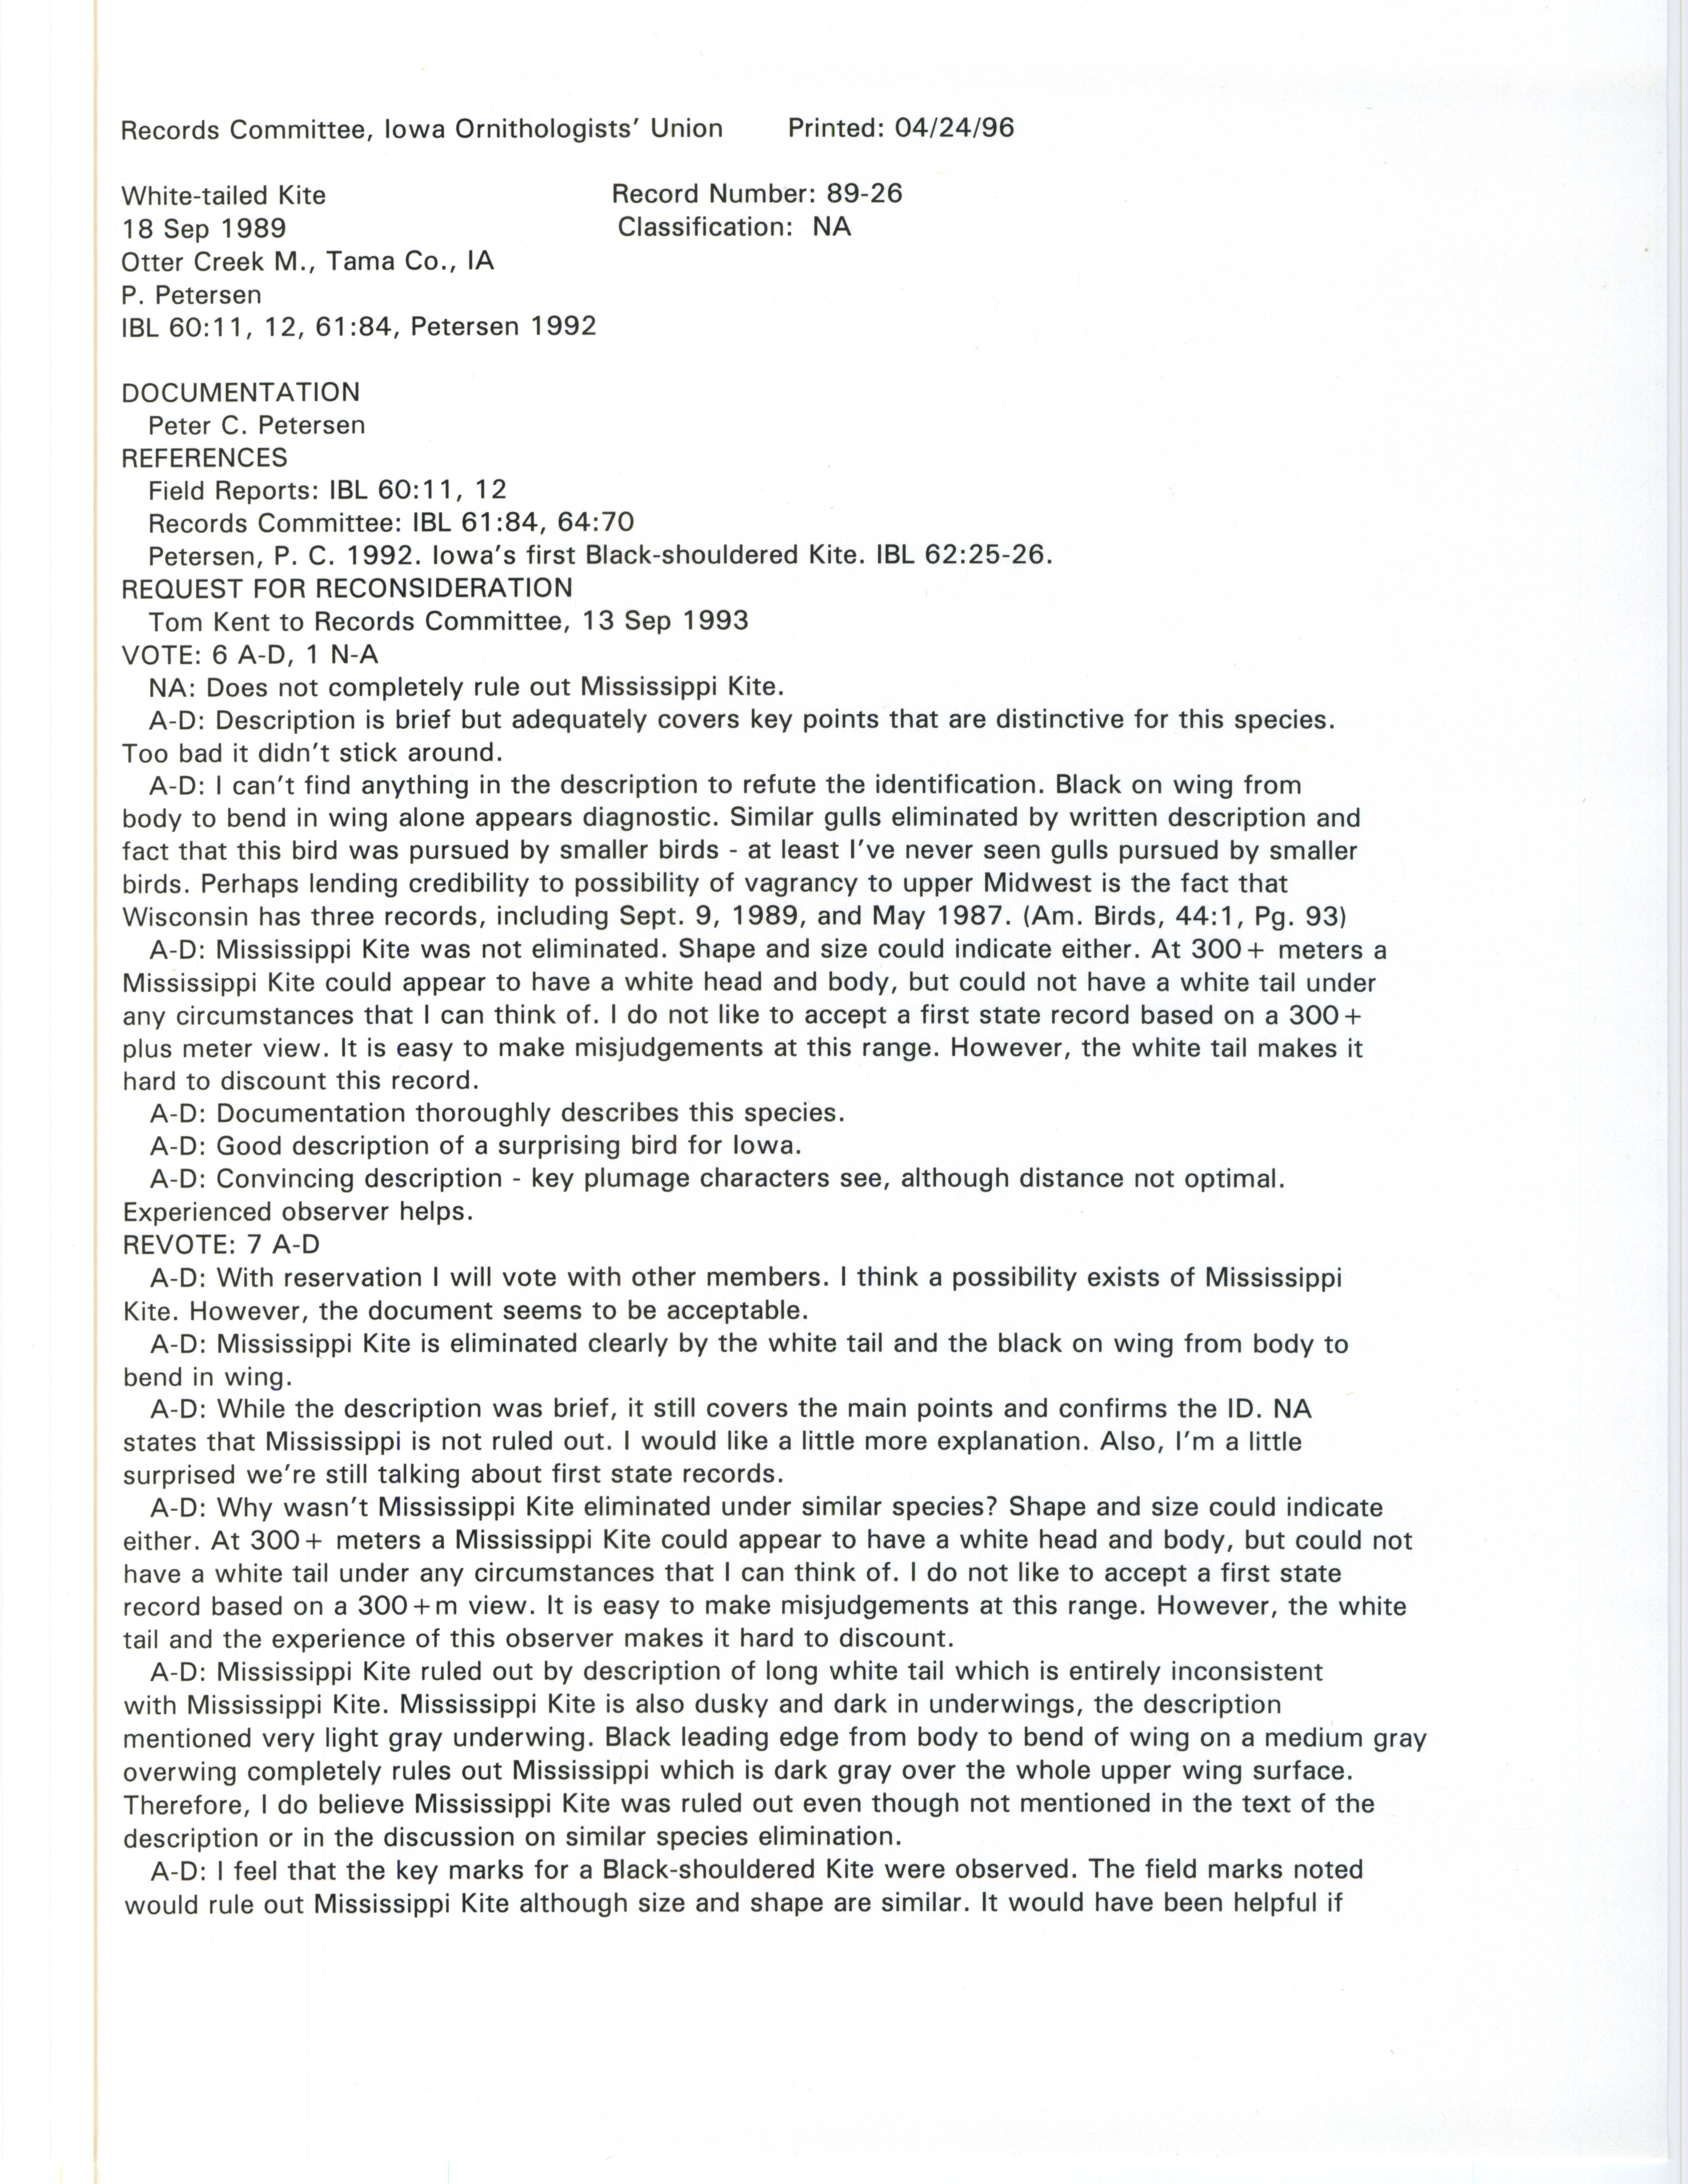 Records Committee review for rare bird sighting of White-tailed Kite at Otter Creek Marsh, 1989